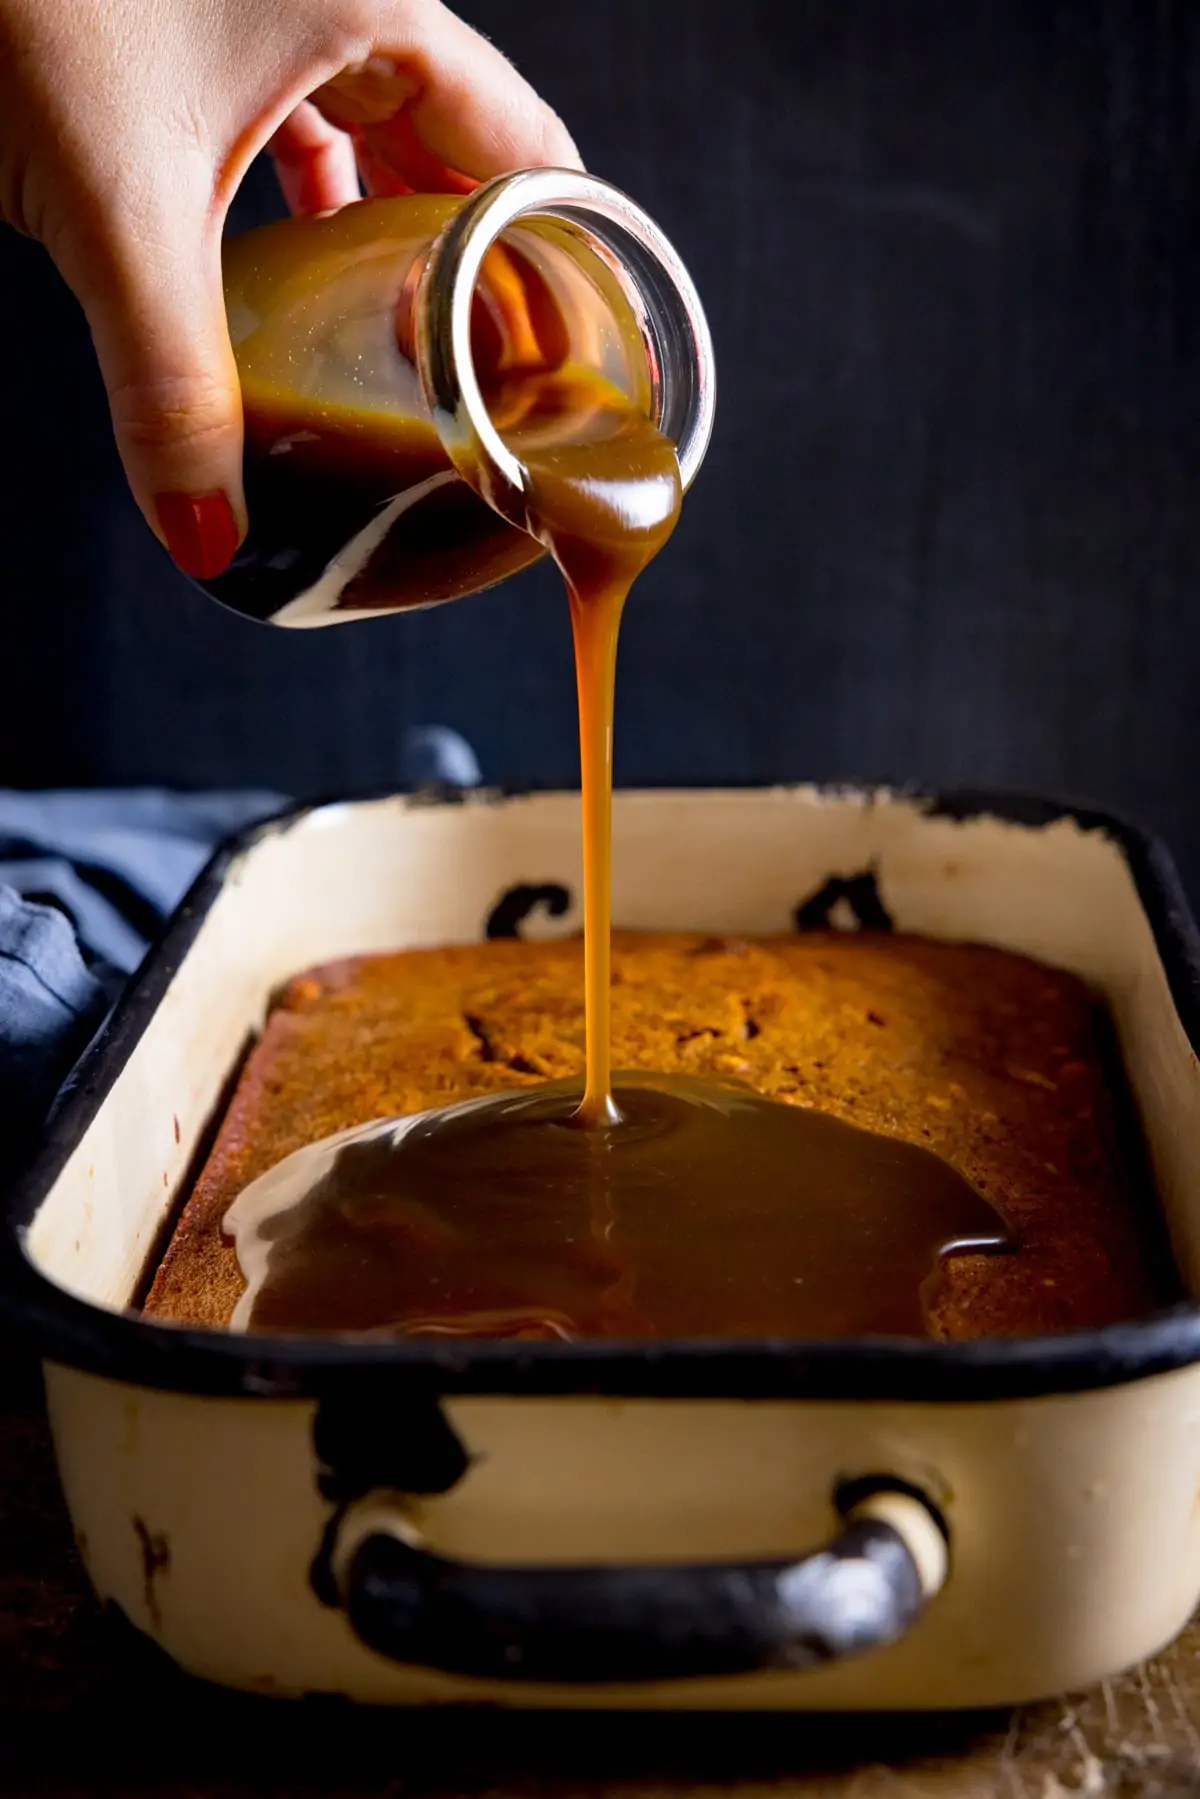 Toffee sauce being poured onto sticky toffee pudding cake